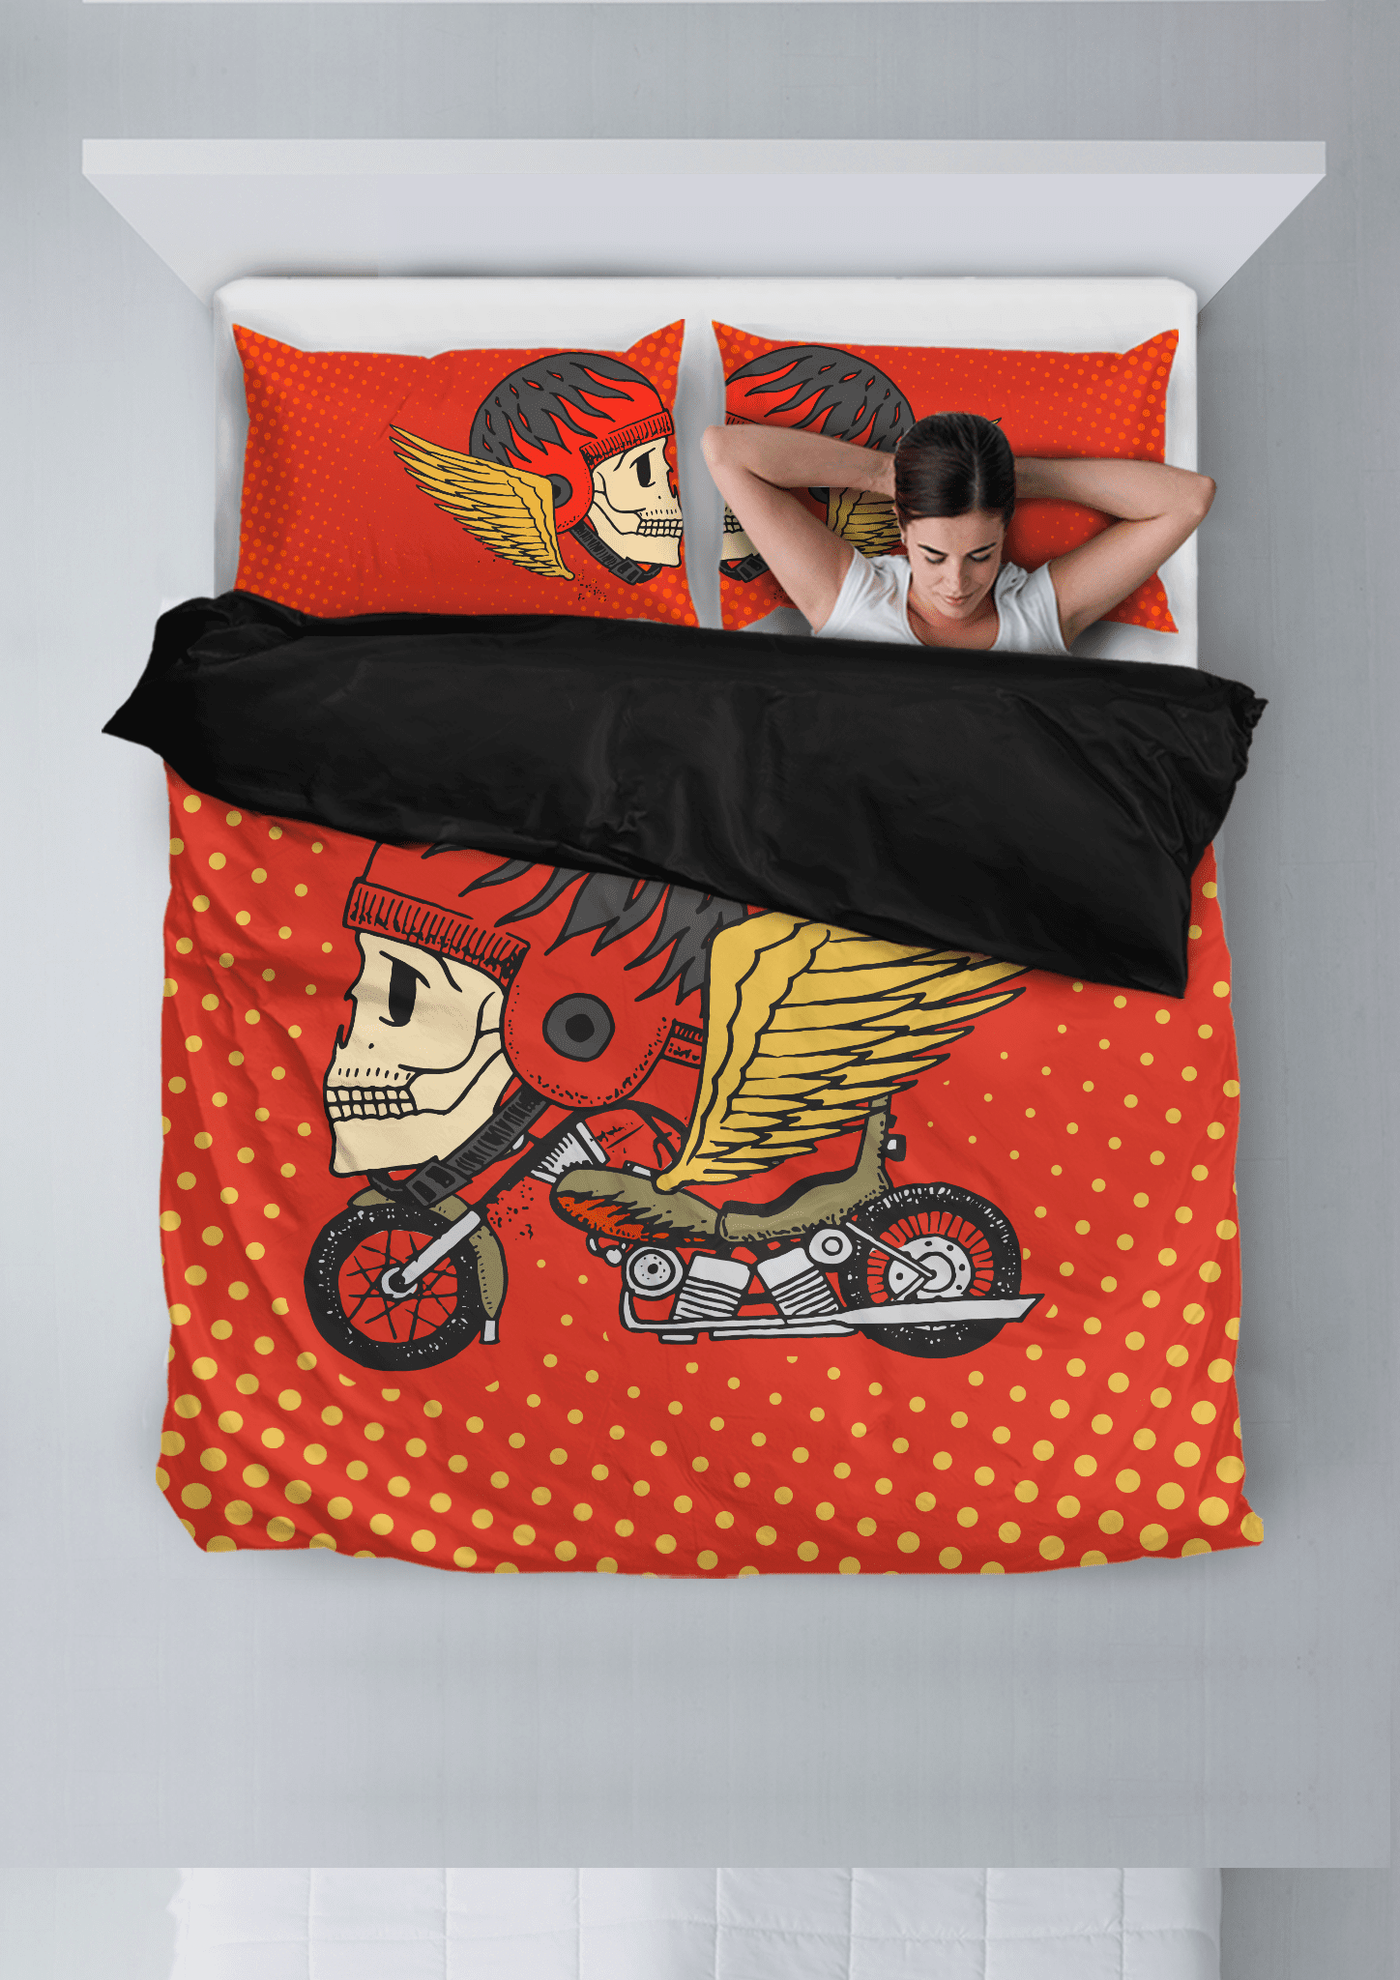 Funky Motorcycle Bedding Sets - American Legend Rider